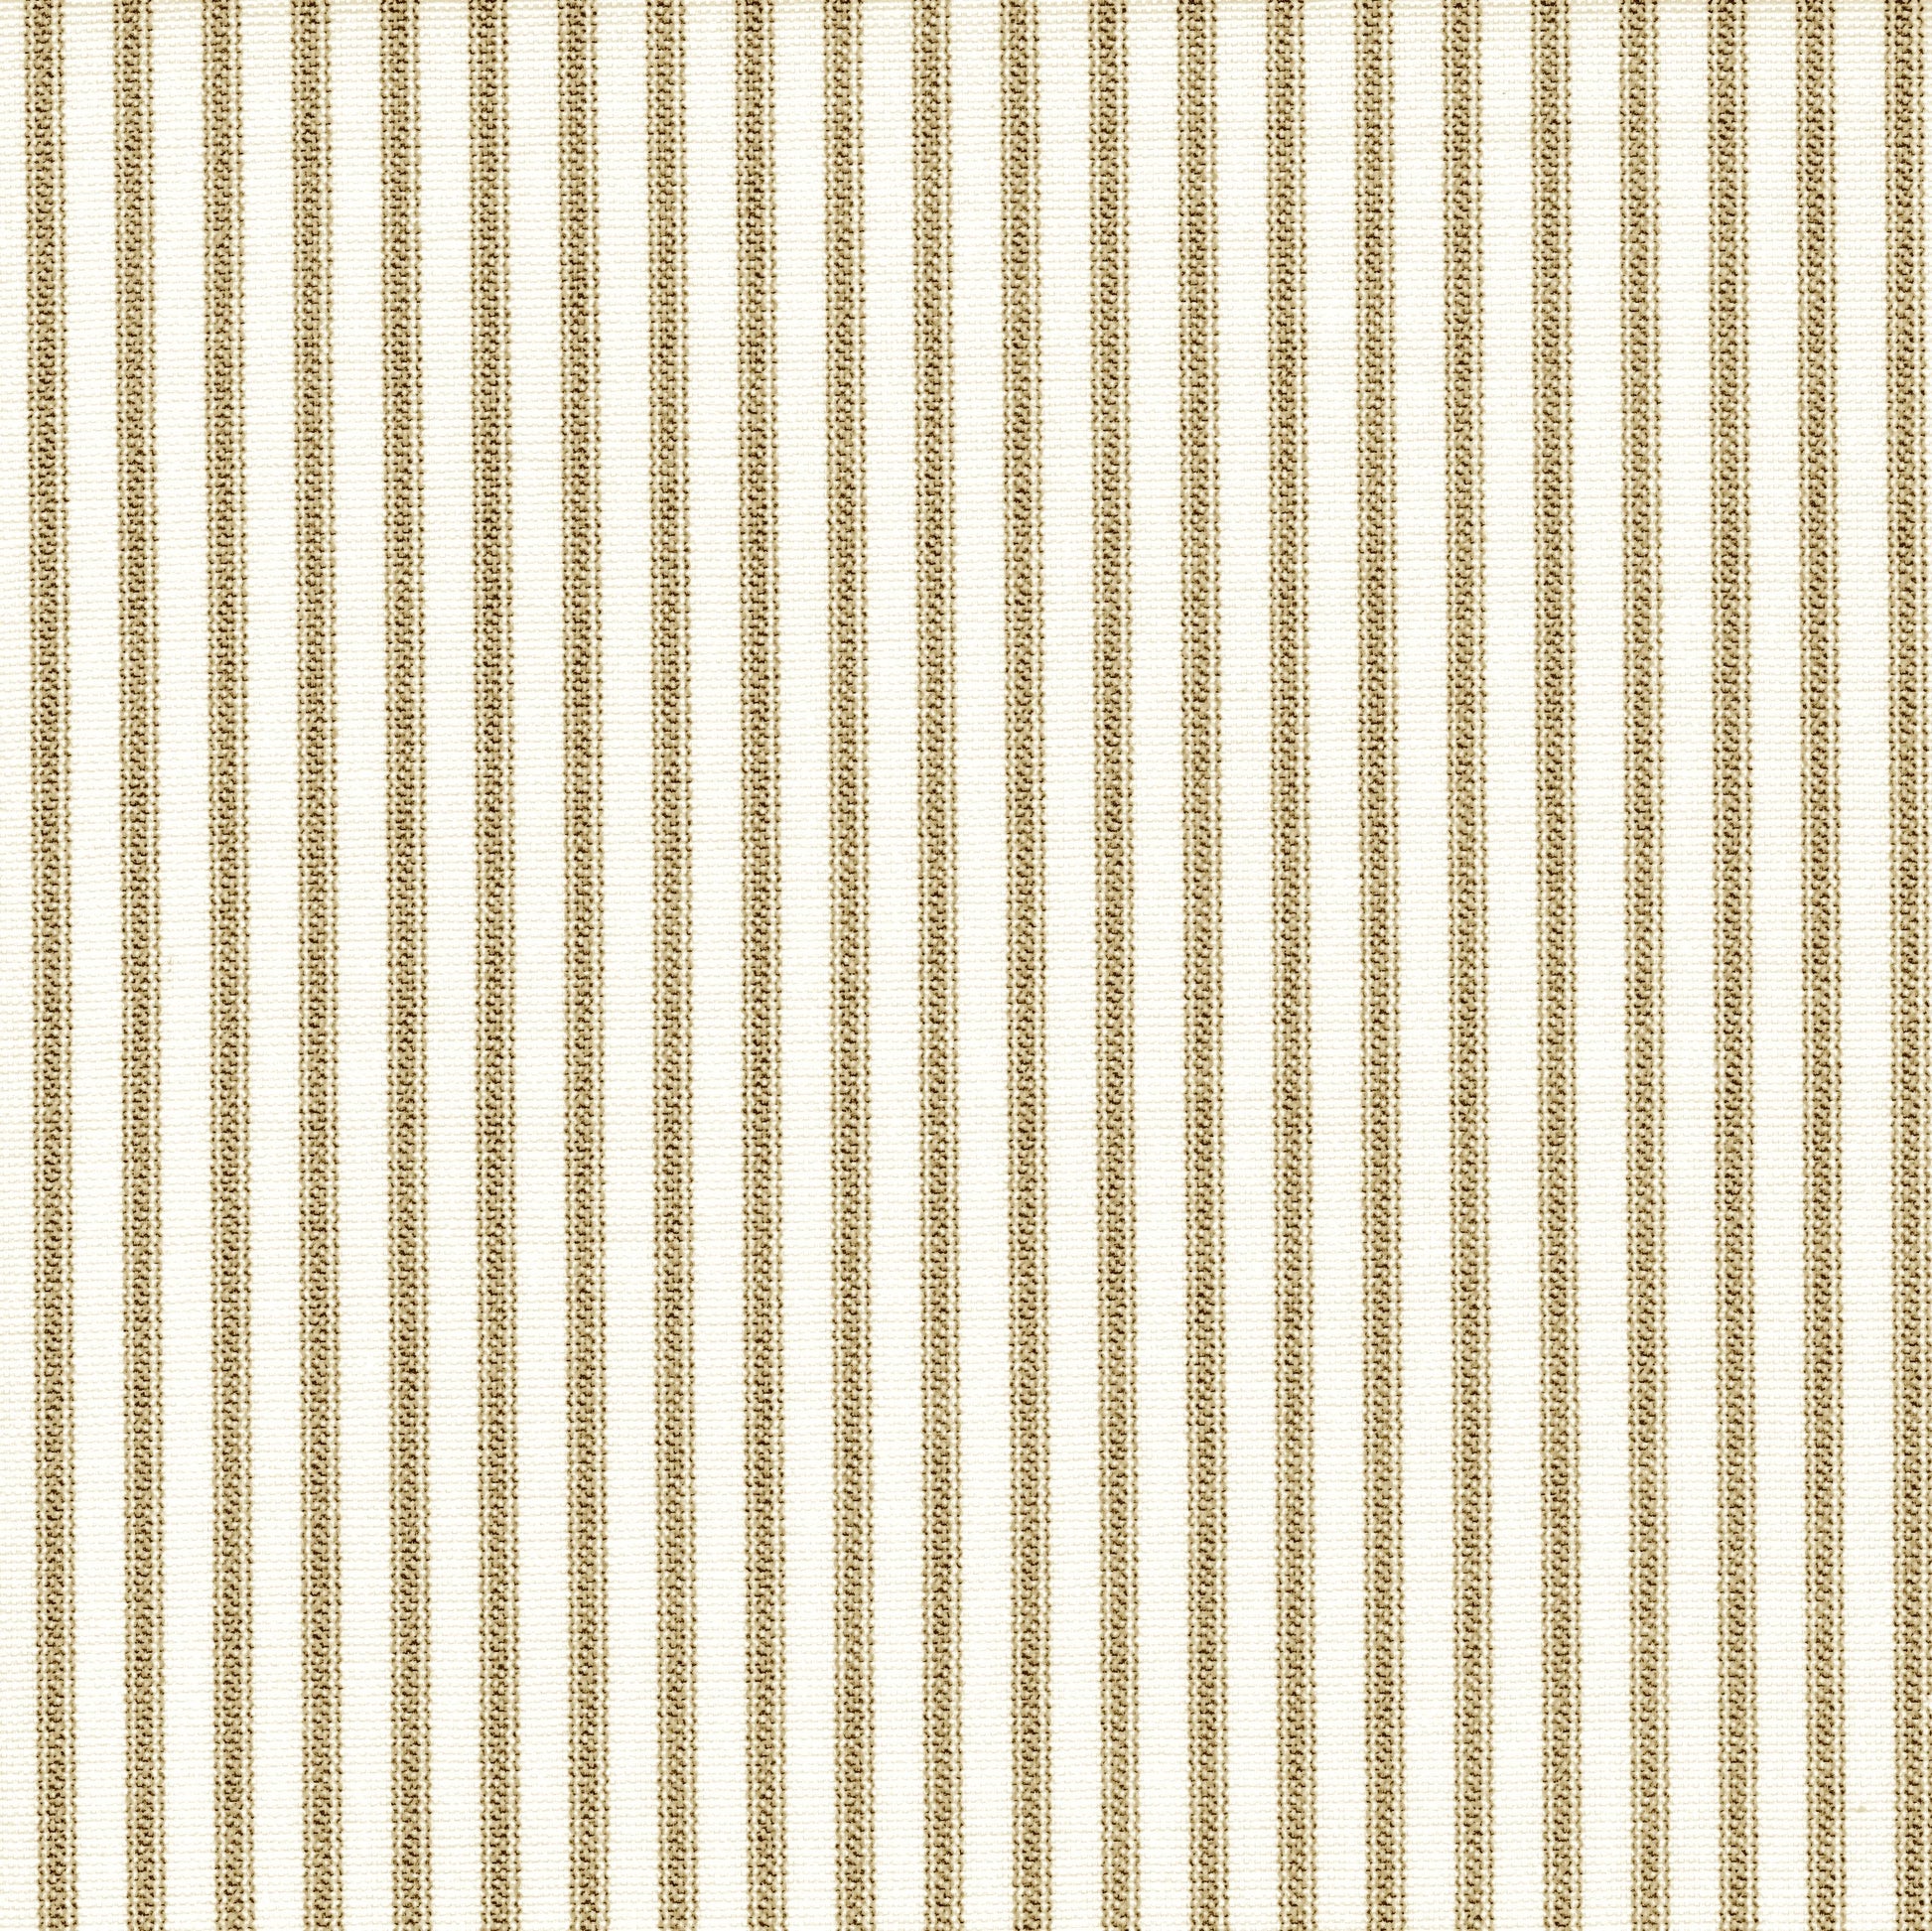 tie-up valance in farmhouse rustic brown ticking stripe